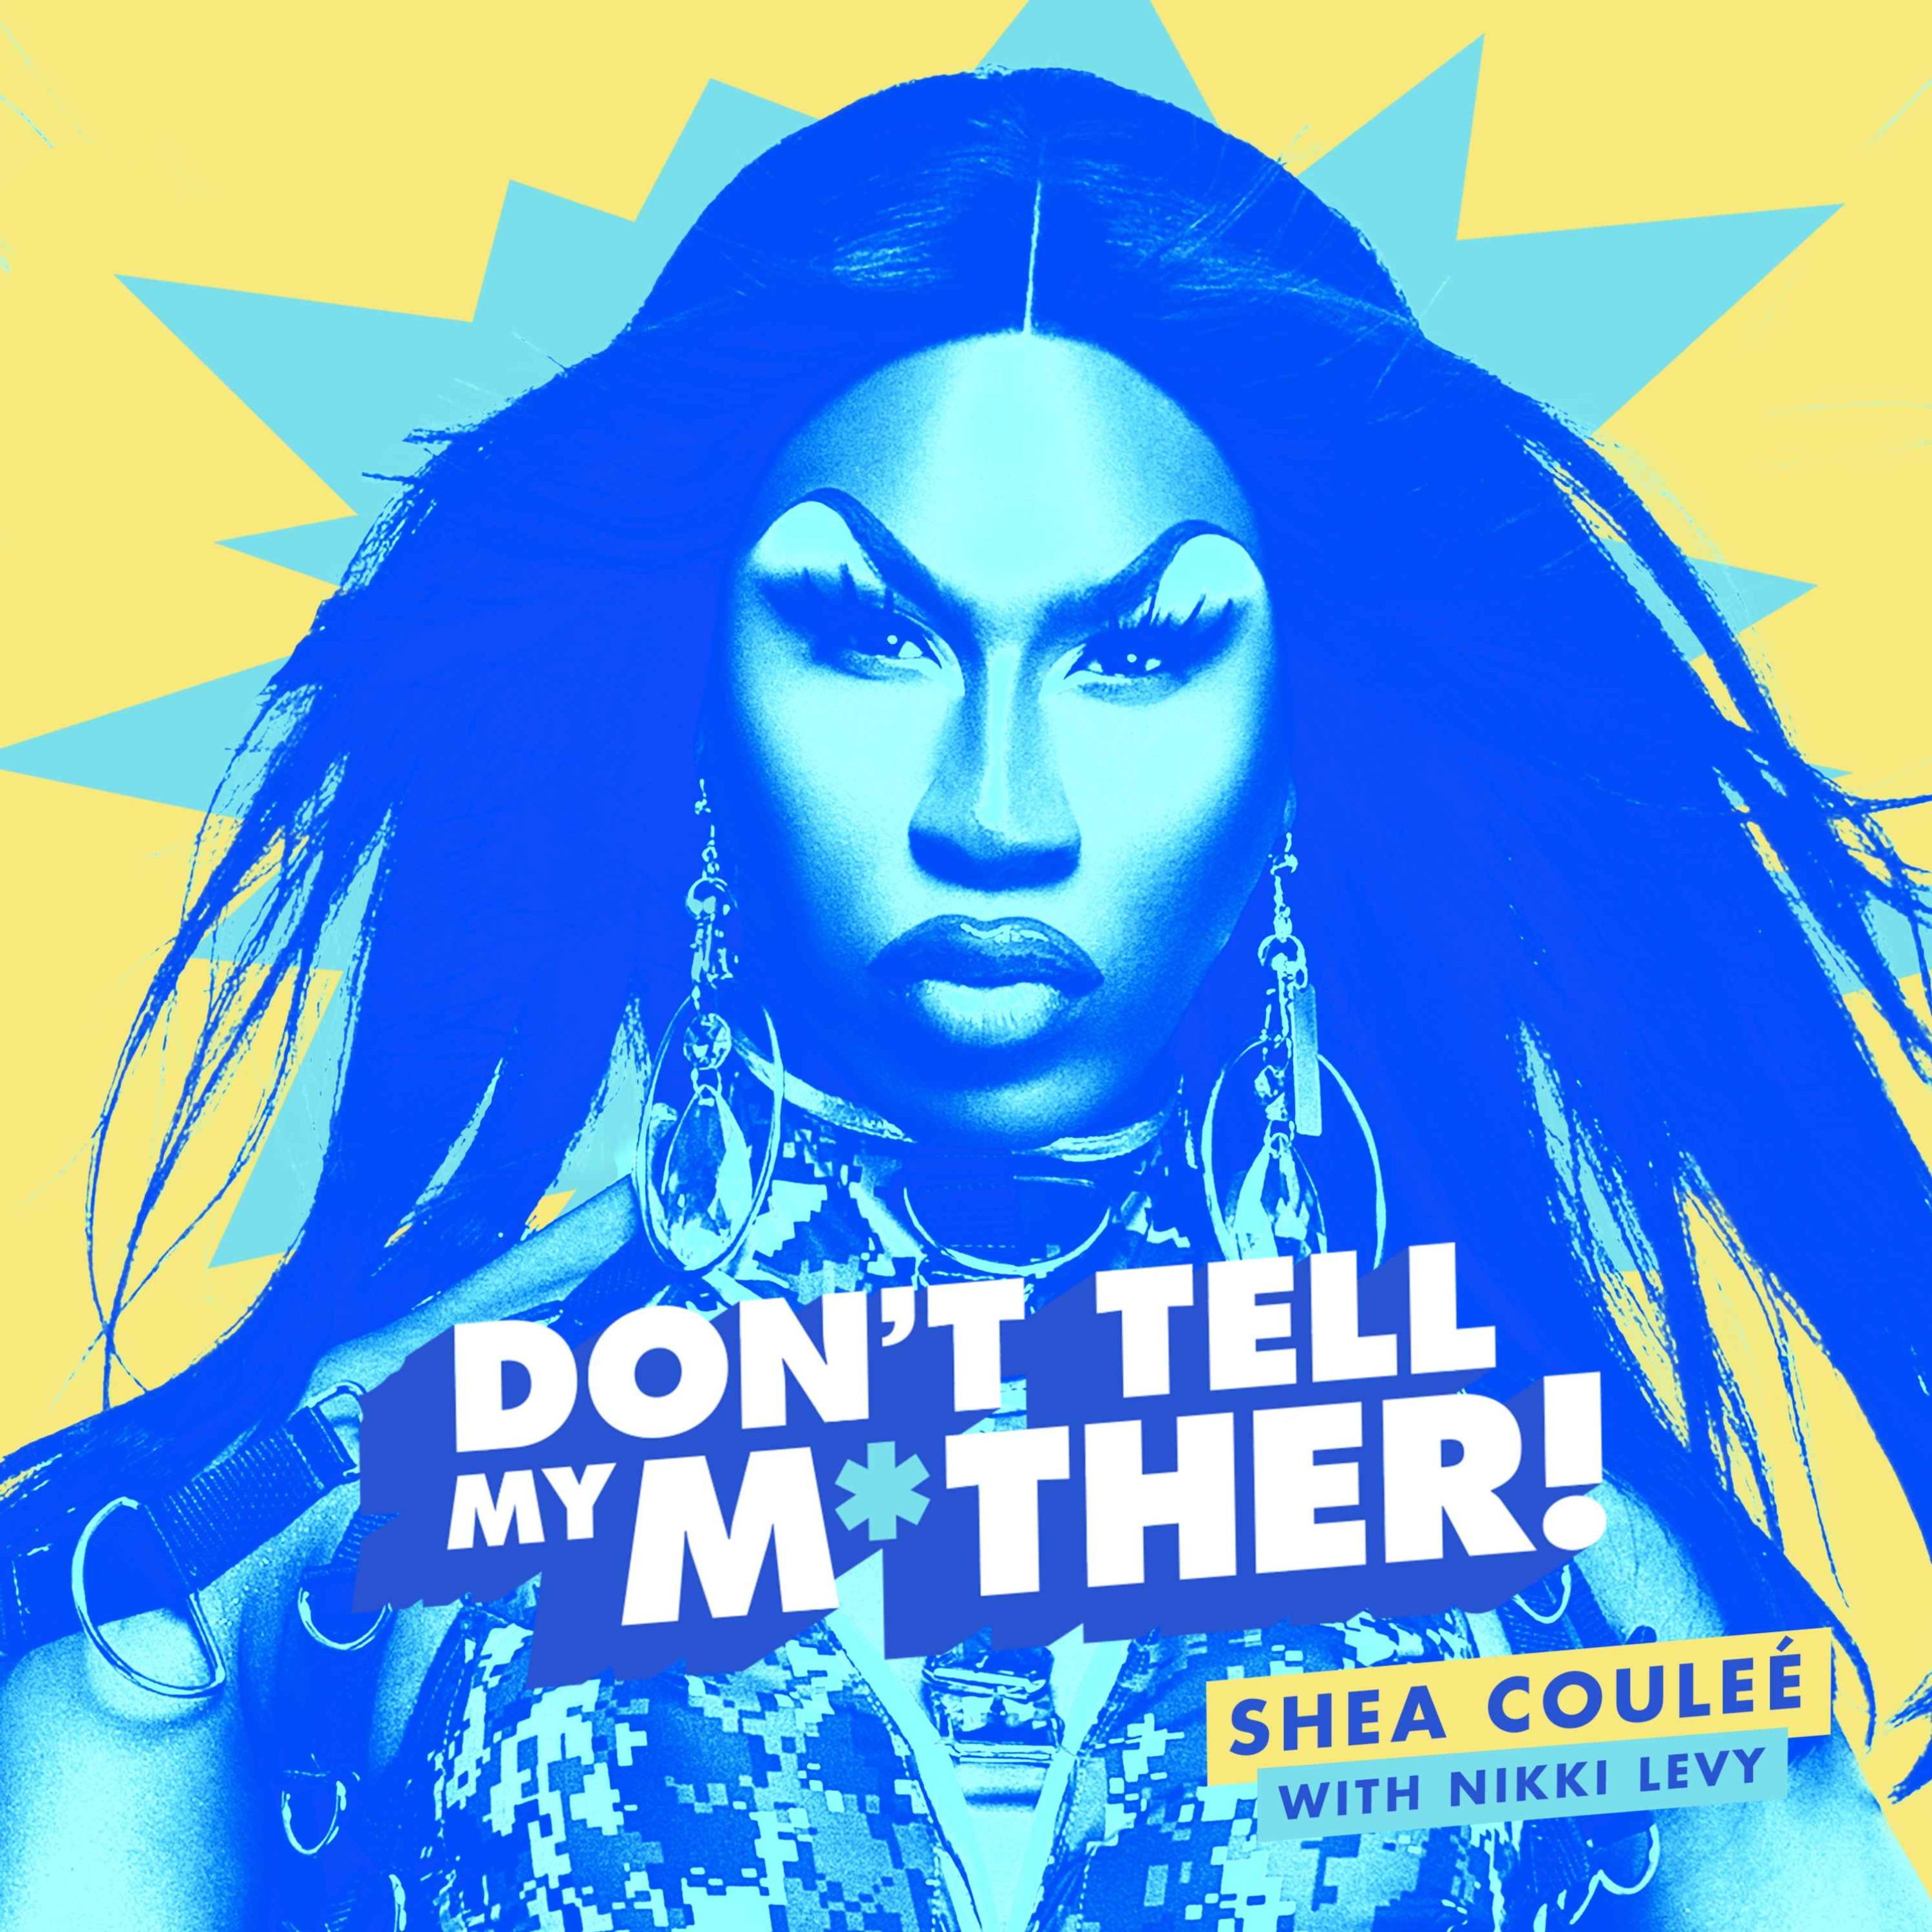 RuPaul's Drag Race Icon Shea Couleé Brings the Heat